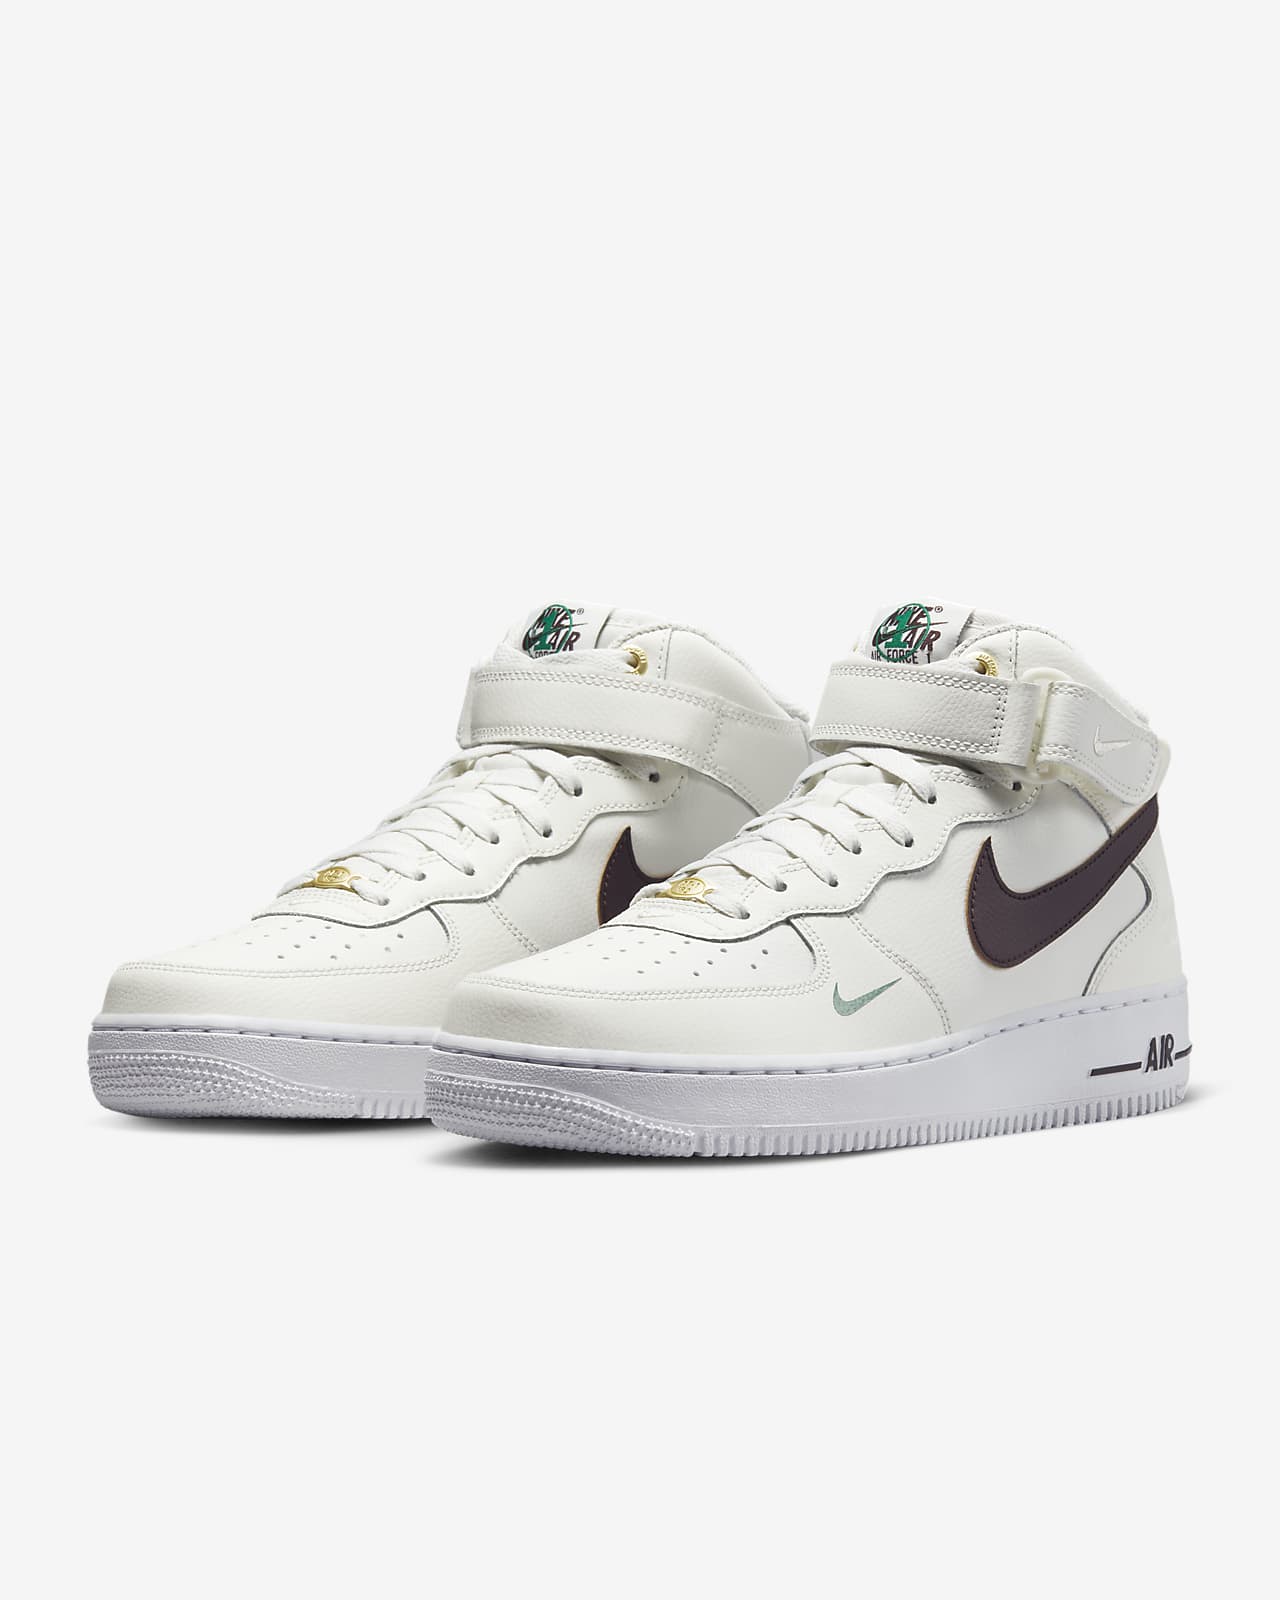 size 8 men's nike air force shoes